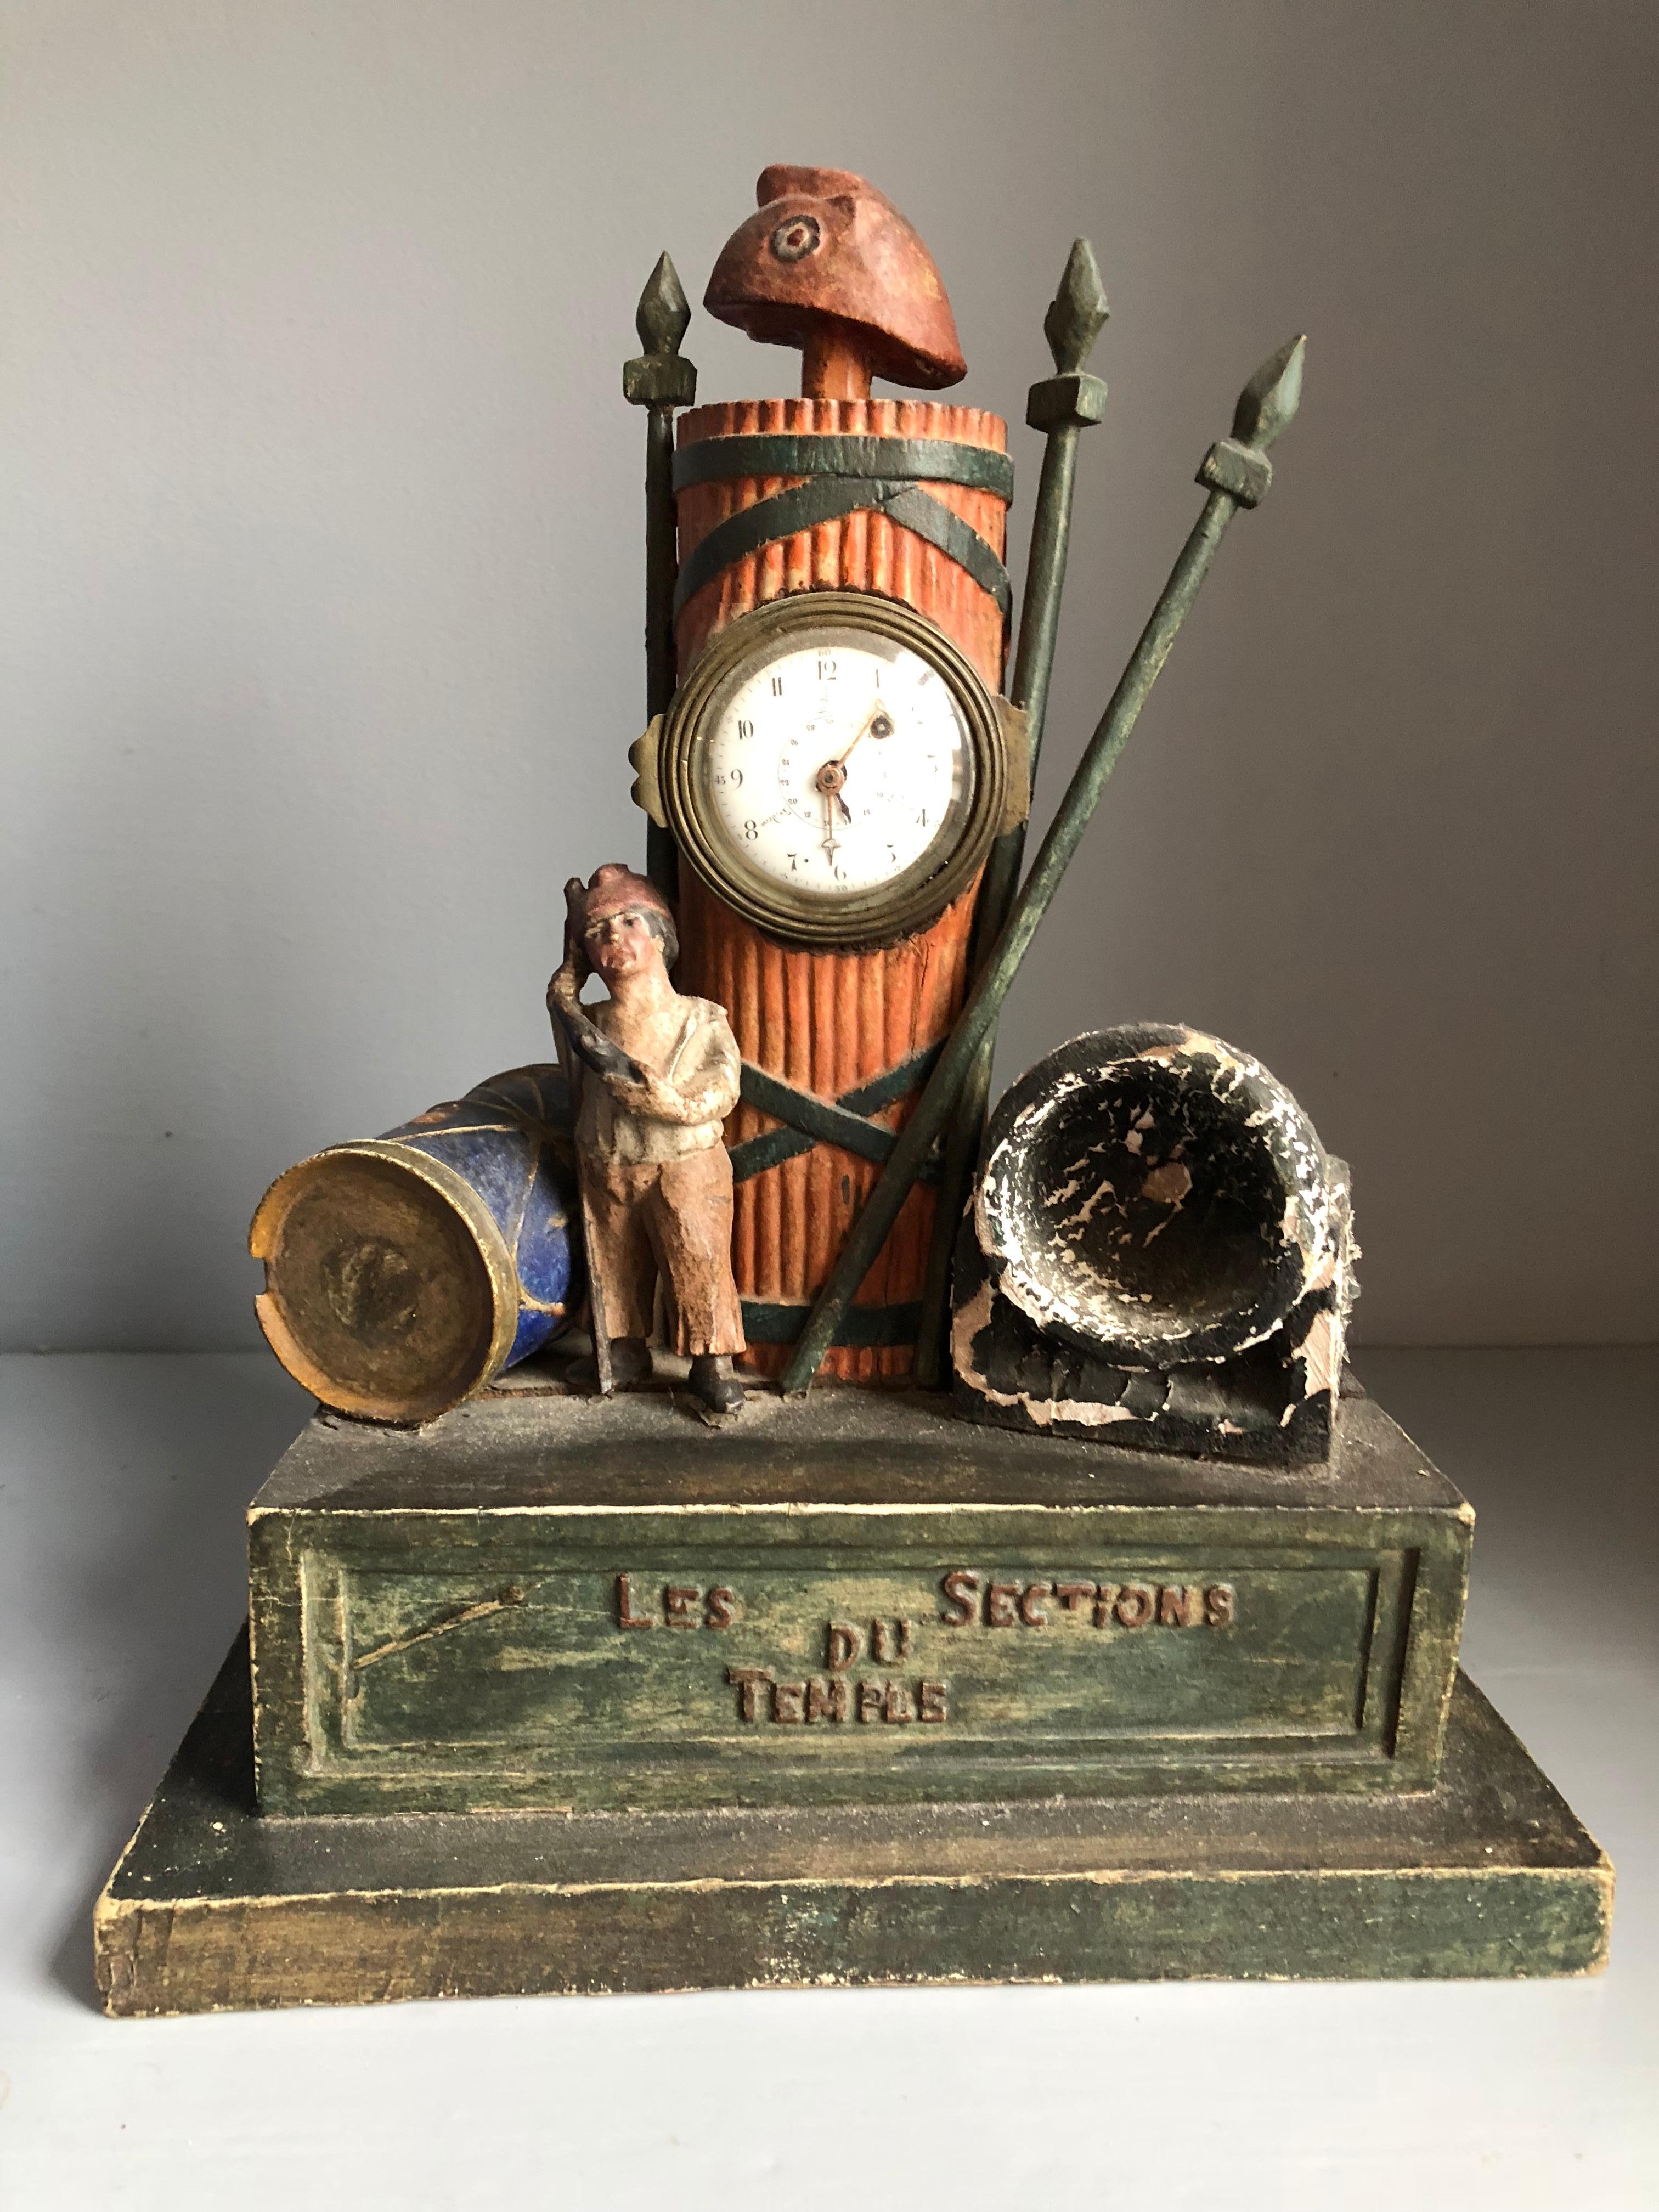 A French folk-art figural mantel clock in carved wood and composite commemorating a fighting unit “Les Sections du Temple” in the French Revolution. The clock depicts a single figure “sans culots” with a walking stick flanked on one side by a drum